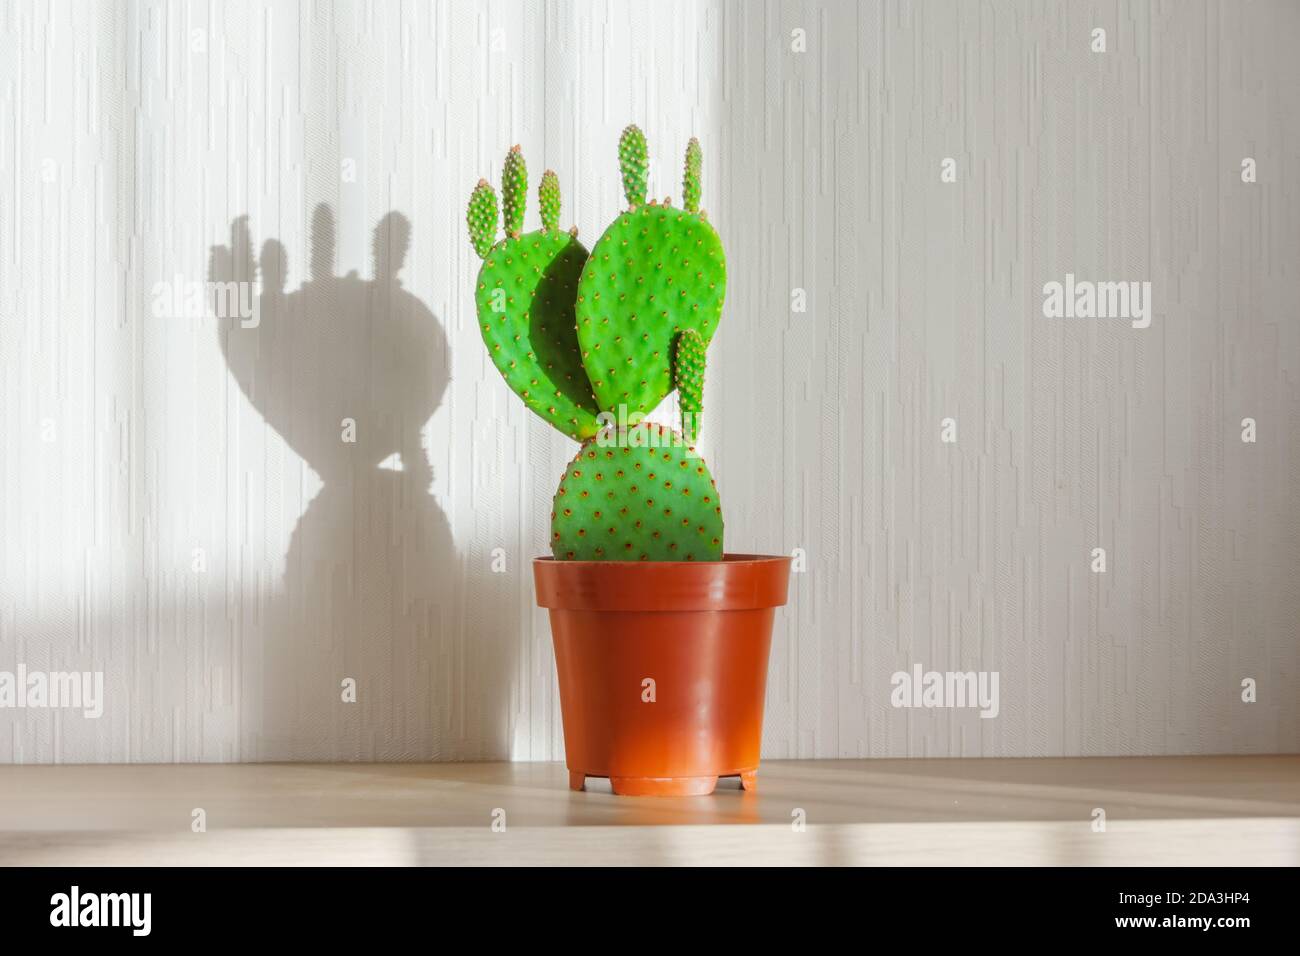 Opuntia microdasys ficus indica, cactus on the shelf of the house, illuminated by the bright sun Stock Photo